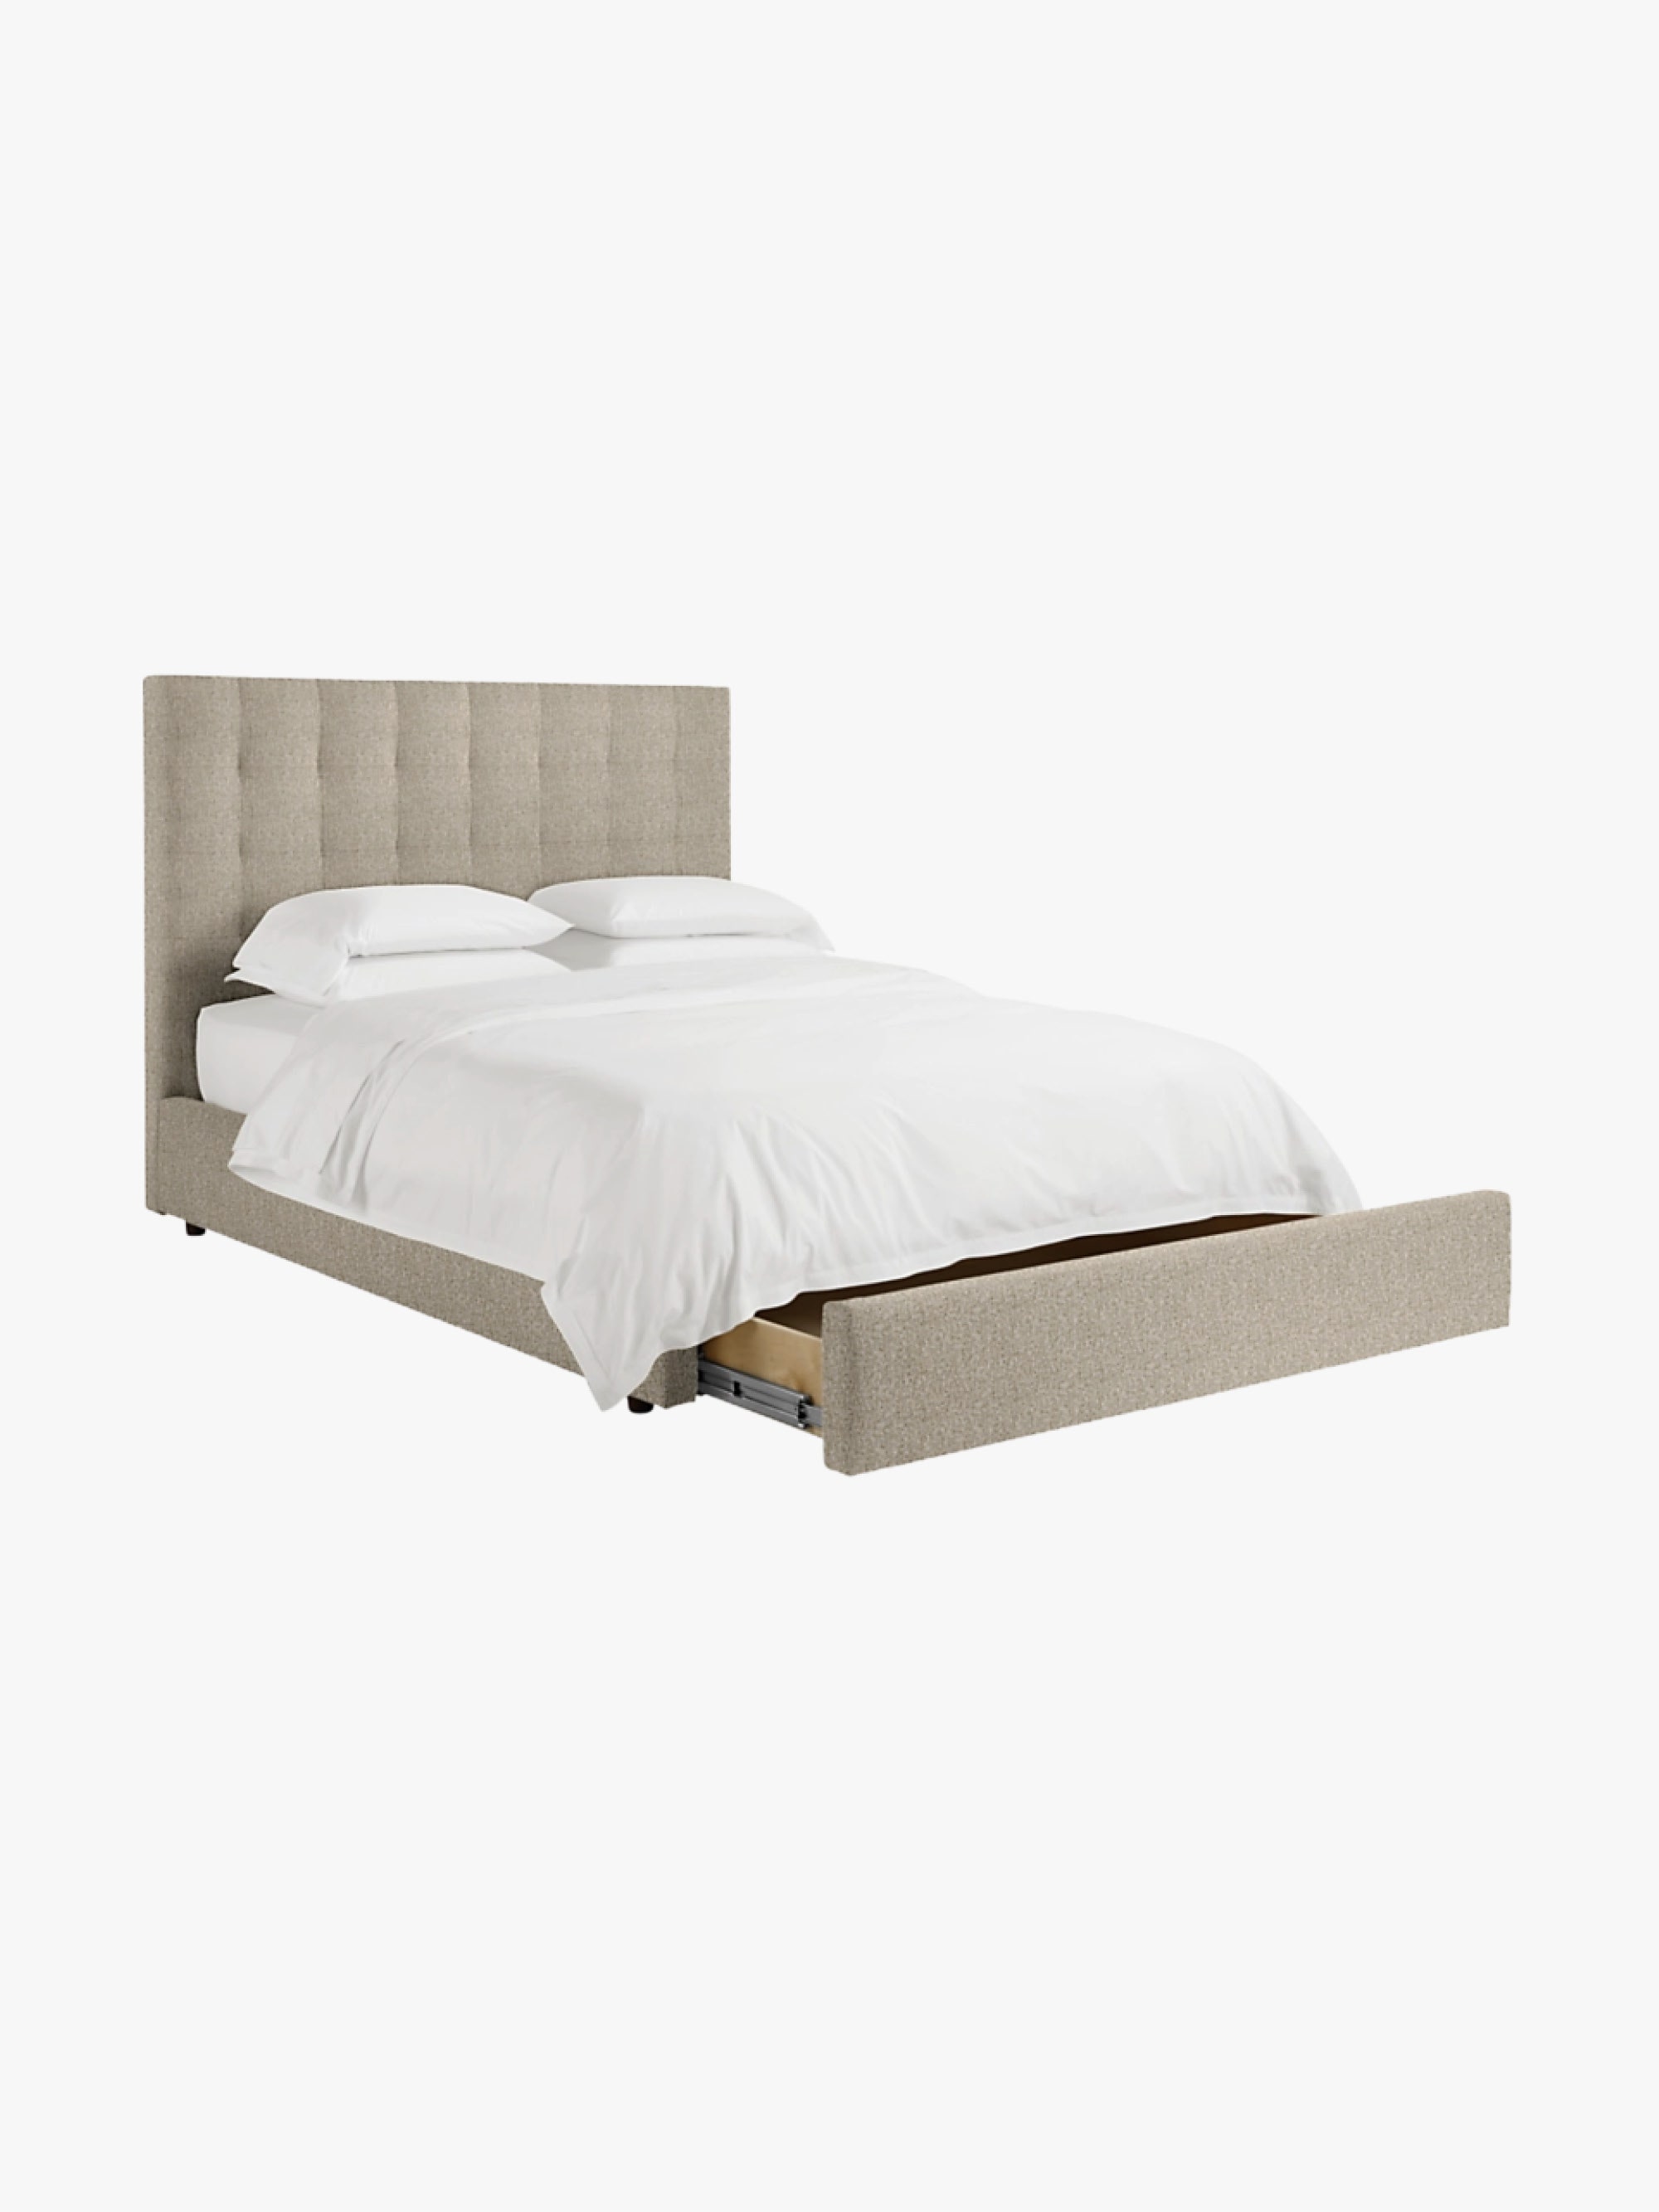 <p>Sleek and stylish are two words to describe this button-tufted panel bed, but its versatility is the real winning feature. This single-drawer storage bed comes in more than 240 fabric and color options, meaning there is no room you can’t match this bed to. There are also two headboard heights (48 inches and 64 inches) for even more customization.</p> <ul> <li><strong>Sizes available:</strong> Twin, full, queen, king, and California king</li> <li><strong>Colors available:</strong> 240 fabric and color options</li> <li><strong>Storage type:</strong> One underbed storage drawer or lift-up storage</li> <li><strong>Materials:</strong> Hardwood</li> <li><strong>Weight capacity:</strong> N/A</li> </ul> $2499, Room & Board. <a href="https://www.roomandboard.com/catalog/bedroom/storage-bed-collections/avery-storage-bed">Get it now!</a><p>Sign up for our newsletter to get the latest in design, decorating, celebrity style, shopping, and more.</p><a href="https://www.architecturaldigest.com/newsletter/subscribe?sourceCode=msnsend">Sign Up Now</a>